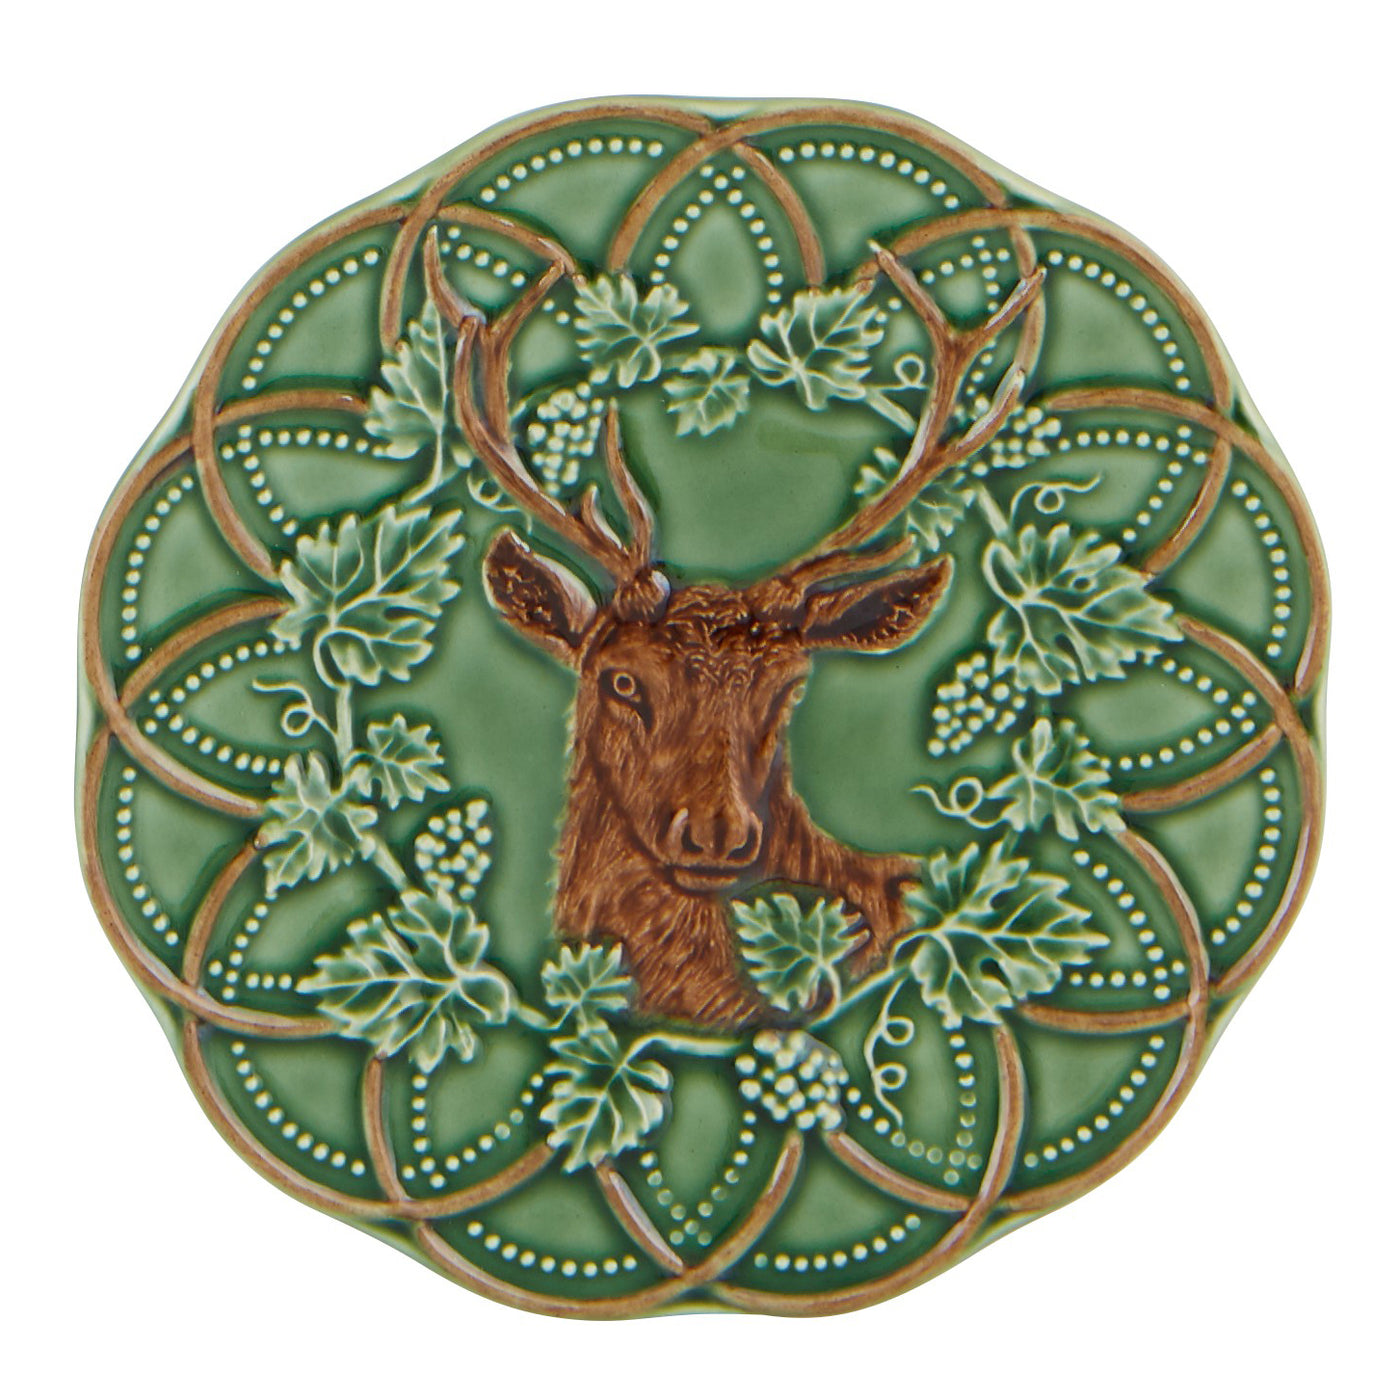 Bordallo Bread and Butter Plate-Dinnerware-Green/Brown Deer-Kevin's Fine Outdoor Gear & Apparel